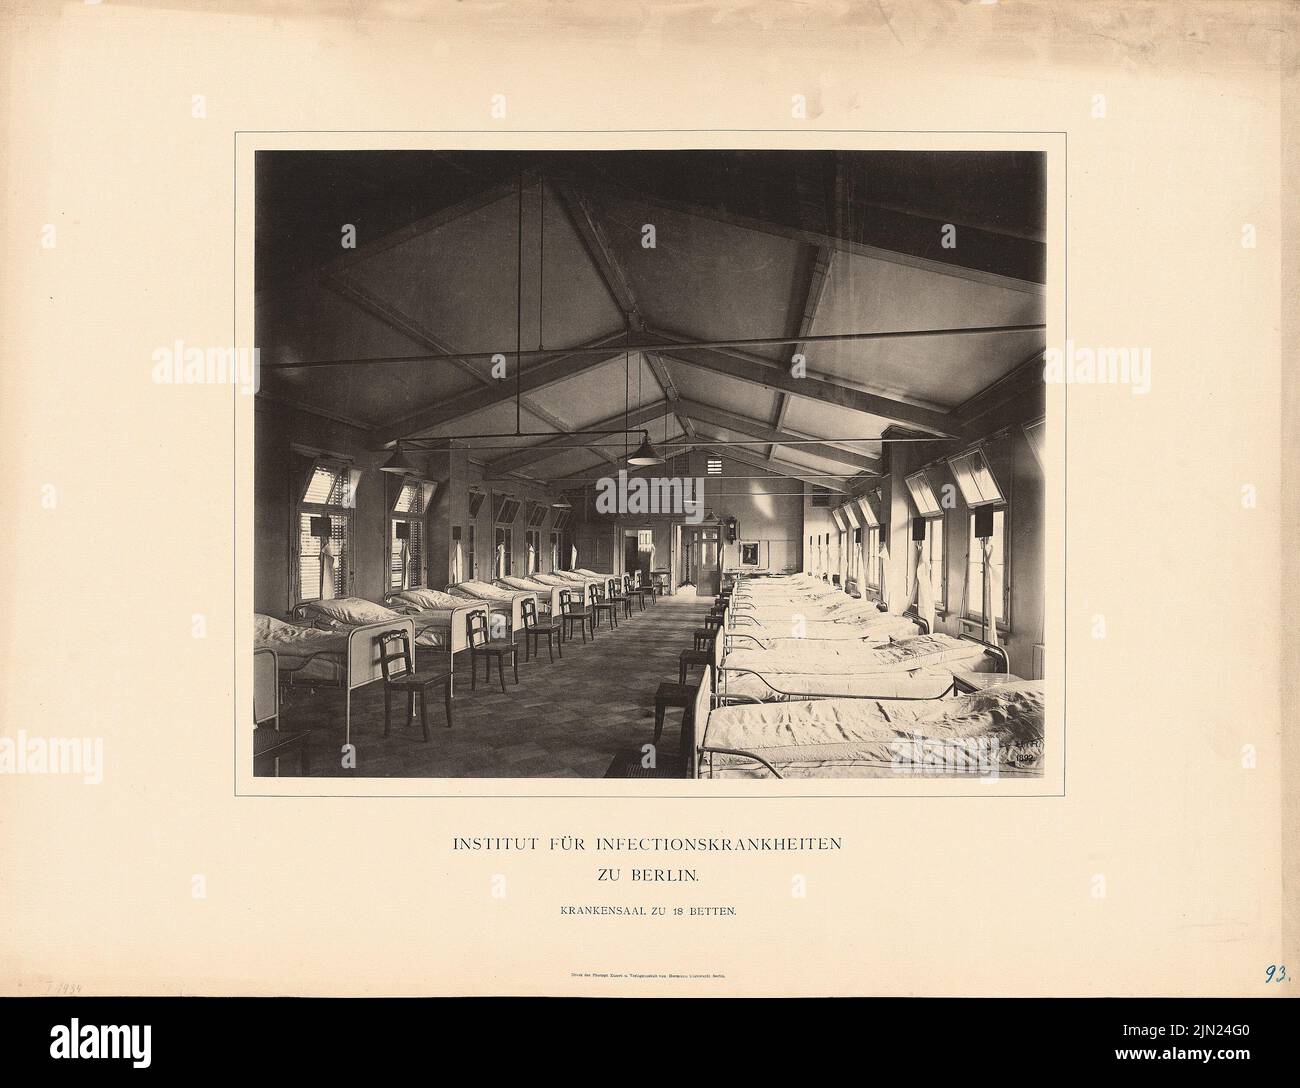 Böttger Paul (1851-1933), Institute for Infectious Diseases of the Charité, Berlin (1892): Interior view sick room for 18 beds. Light pressure on the cardboard, 48.7 x 63.4 cm (including scan edges) Stock Photo